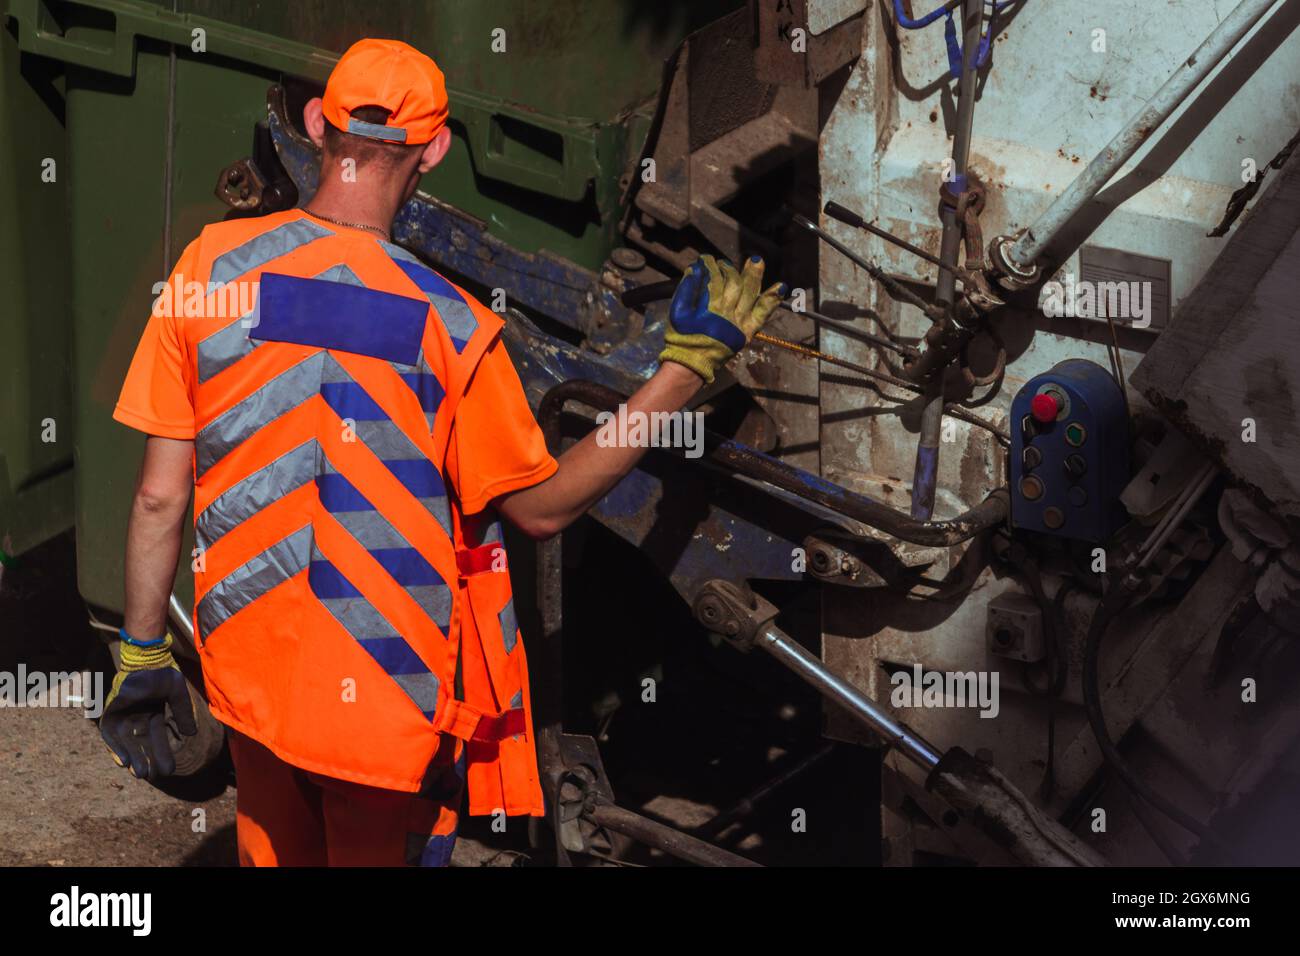 Workers in bright orange uniforms are taking out garbage.  Stock Photo